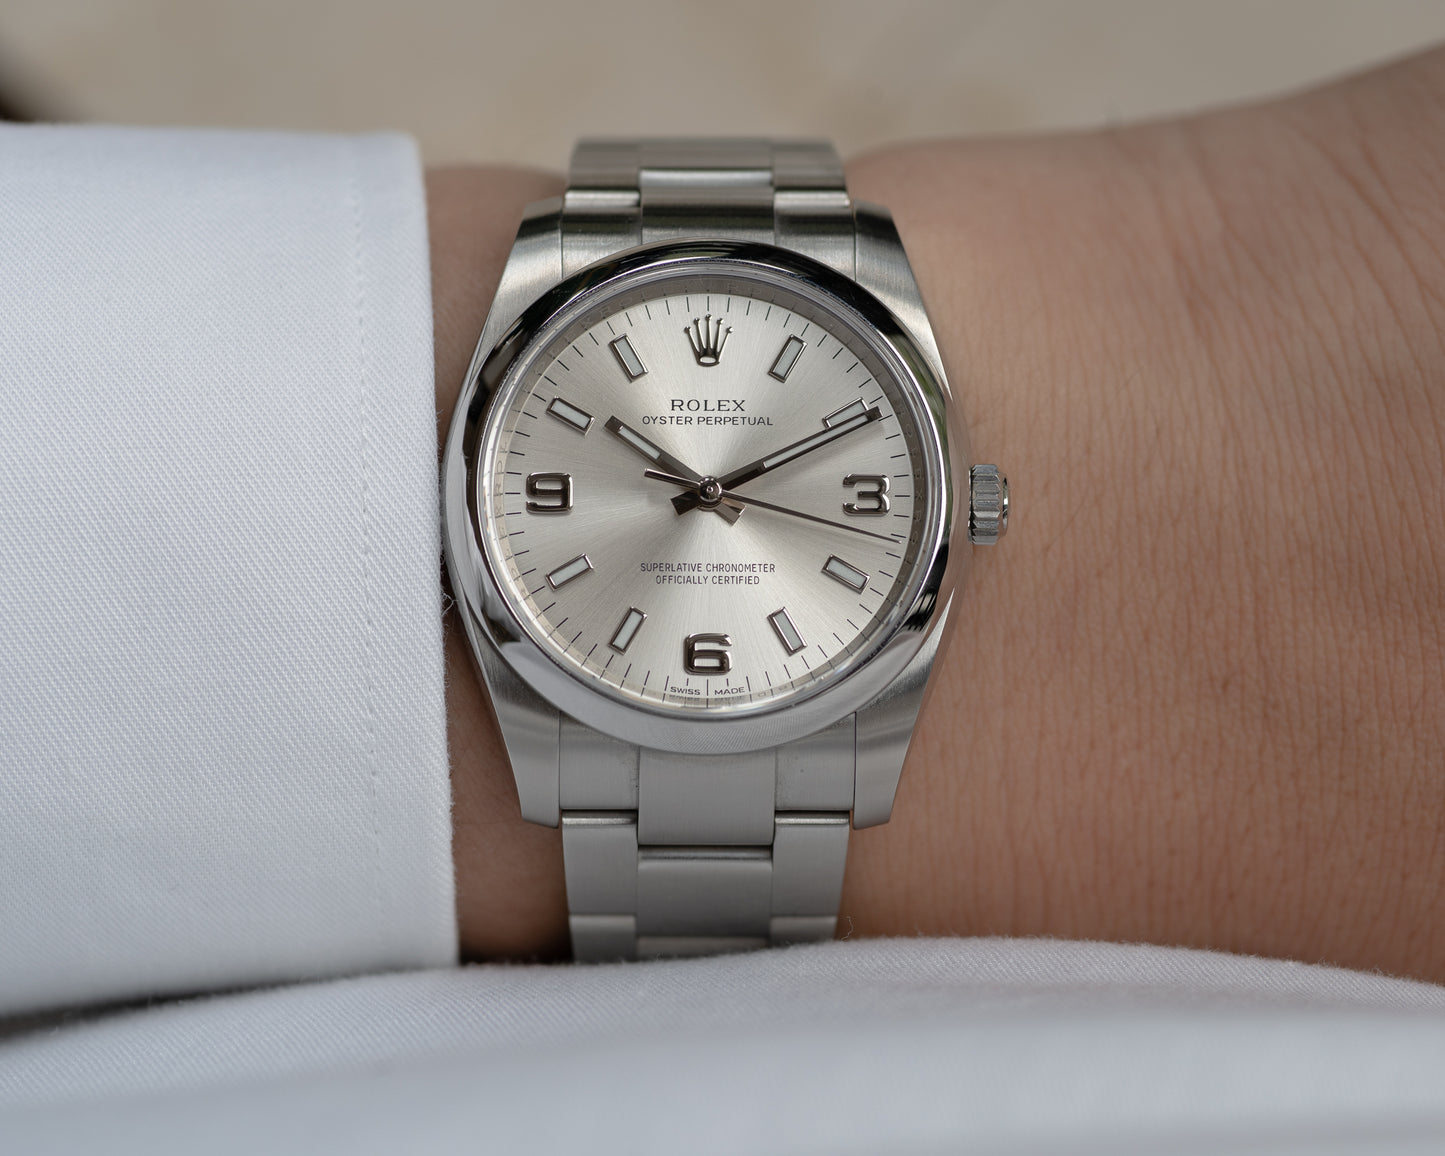 Rolex Oyster Perpetual "Air-King" Silver 369 Dial 114200 full set from 2019